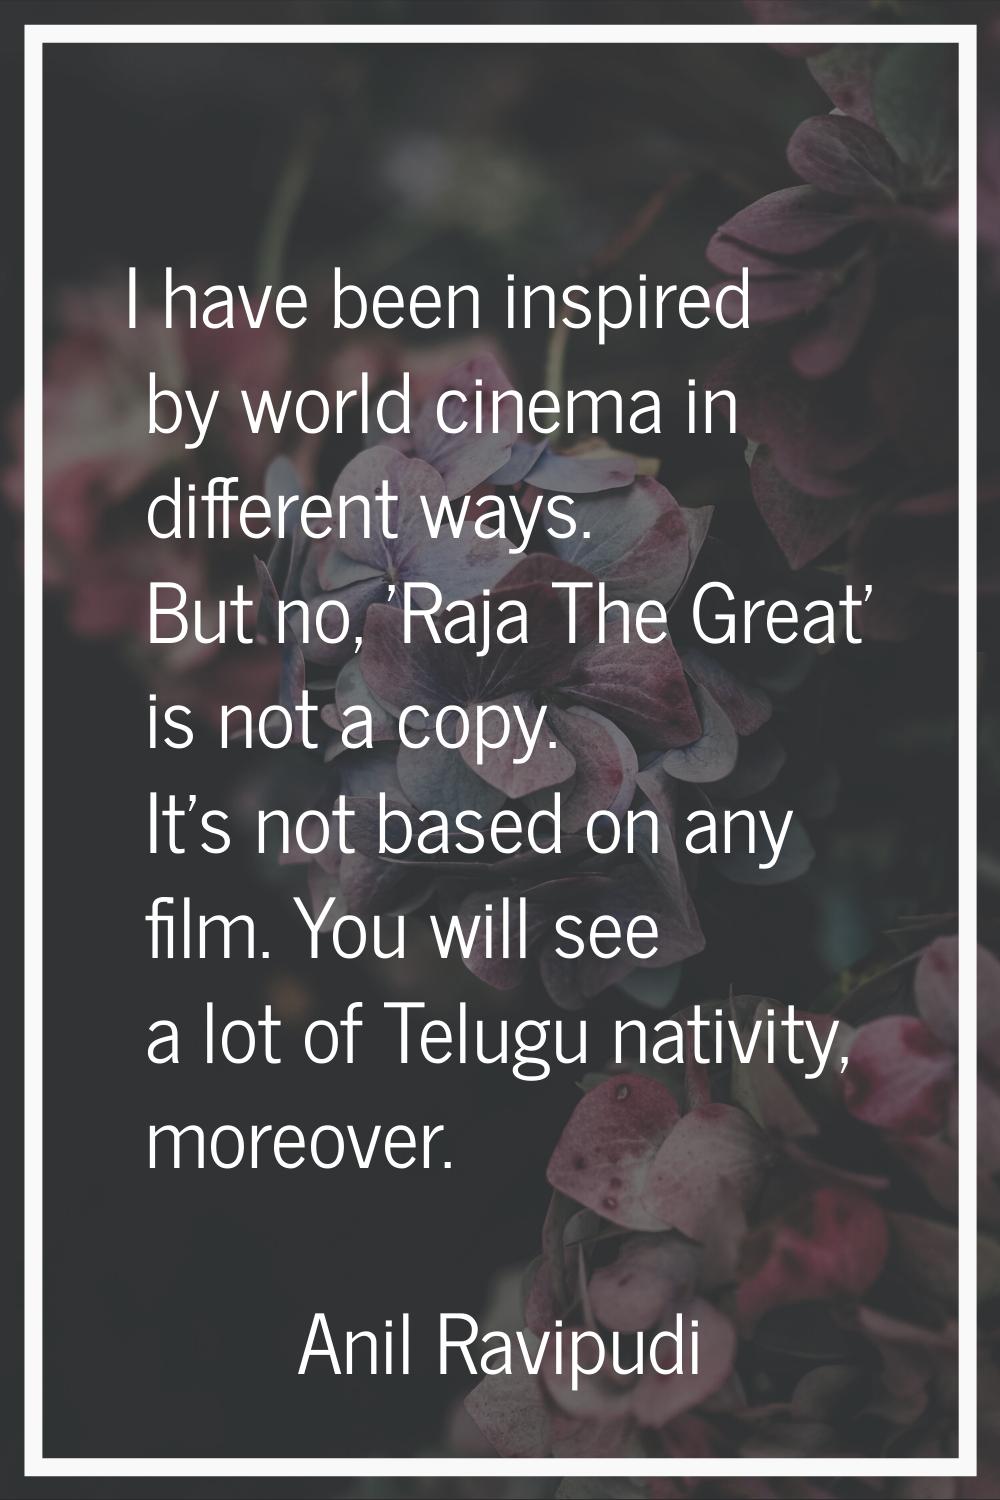 I have been inspired by world cinema in different ways. But no, 'Raja The Great' is not a copy. It'